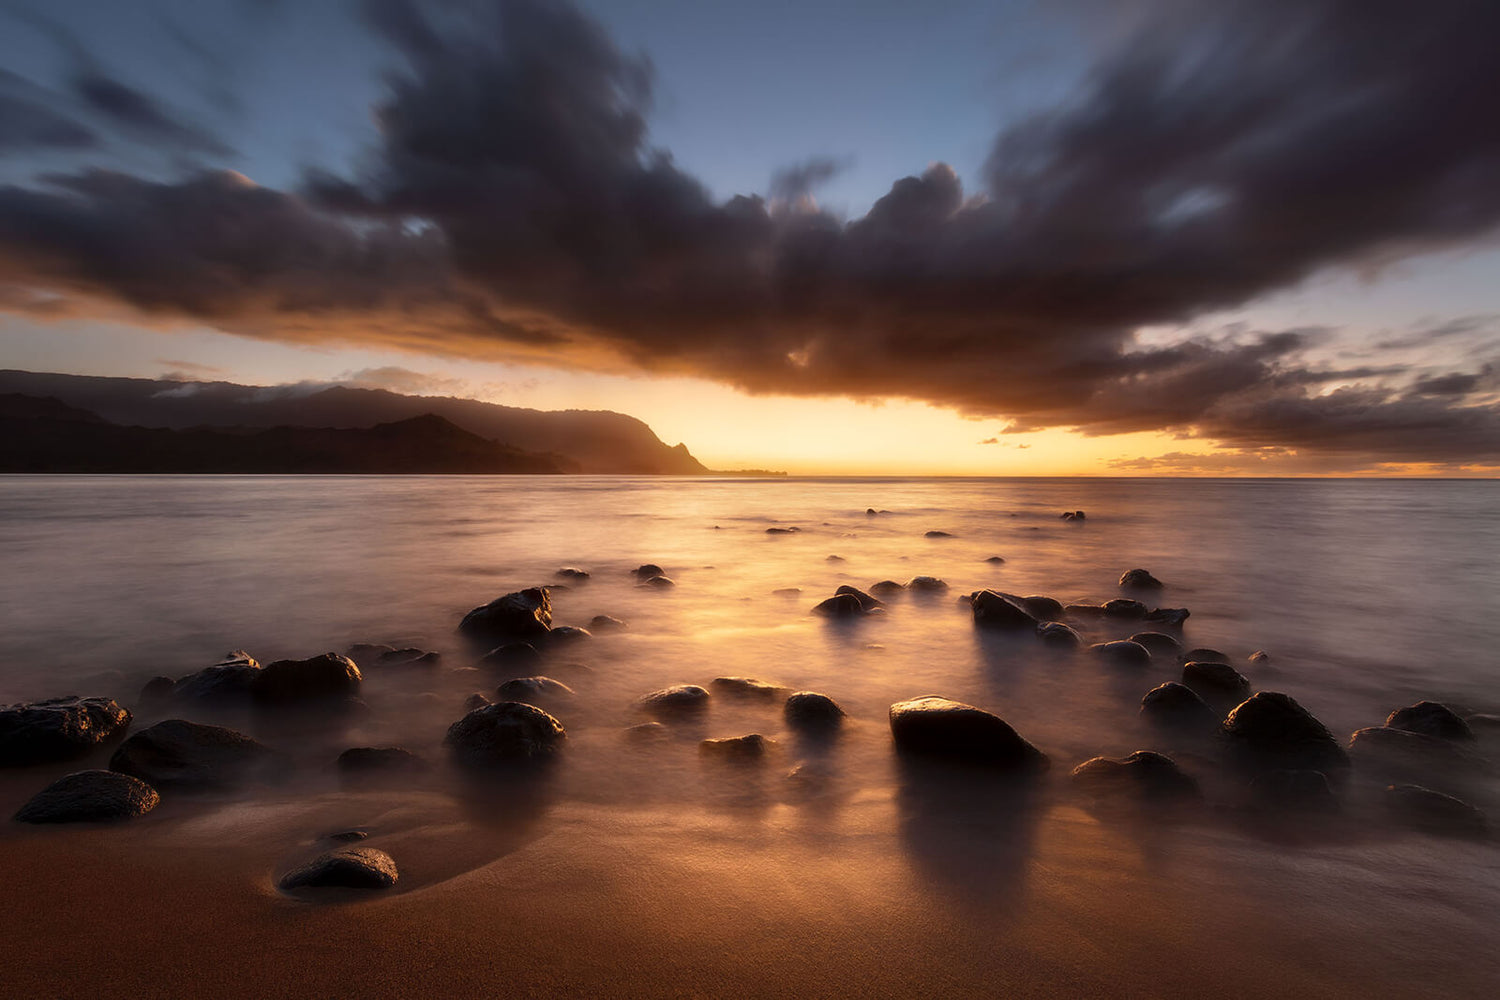 A nature photography print showing sunset at Hanalei Bay on Kauai. This fine art photography print is available in Lars Gesing's Seattle photography gallery.